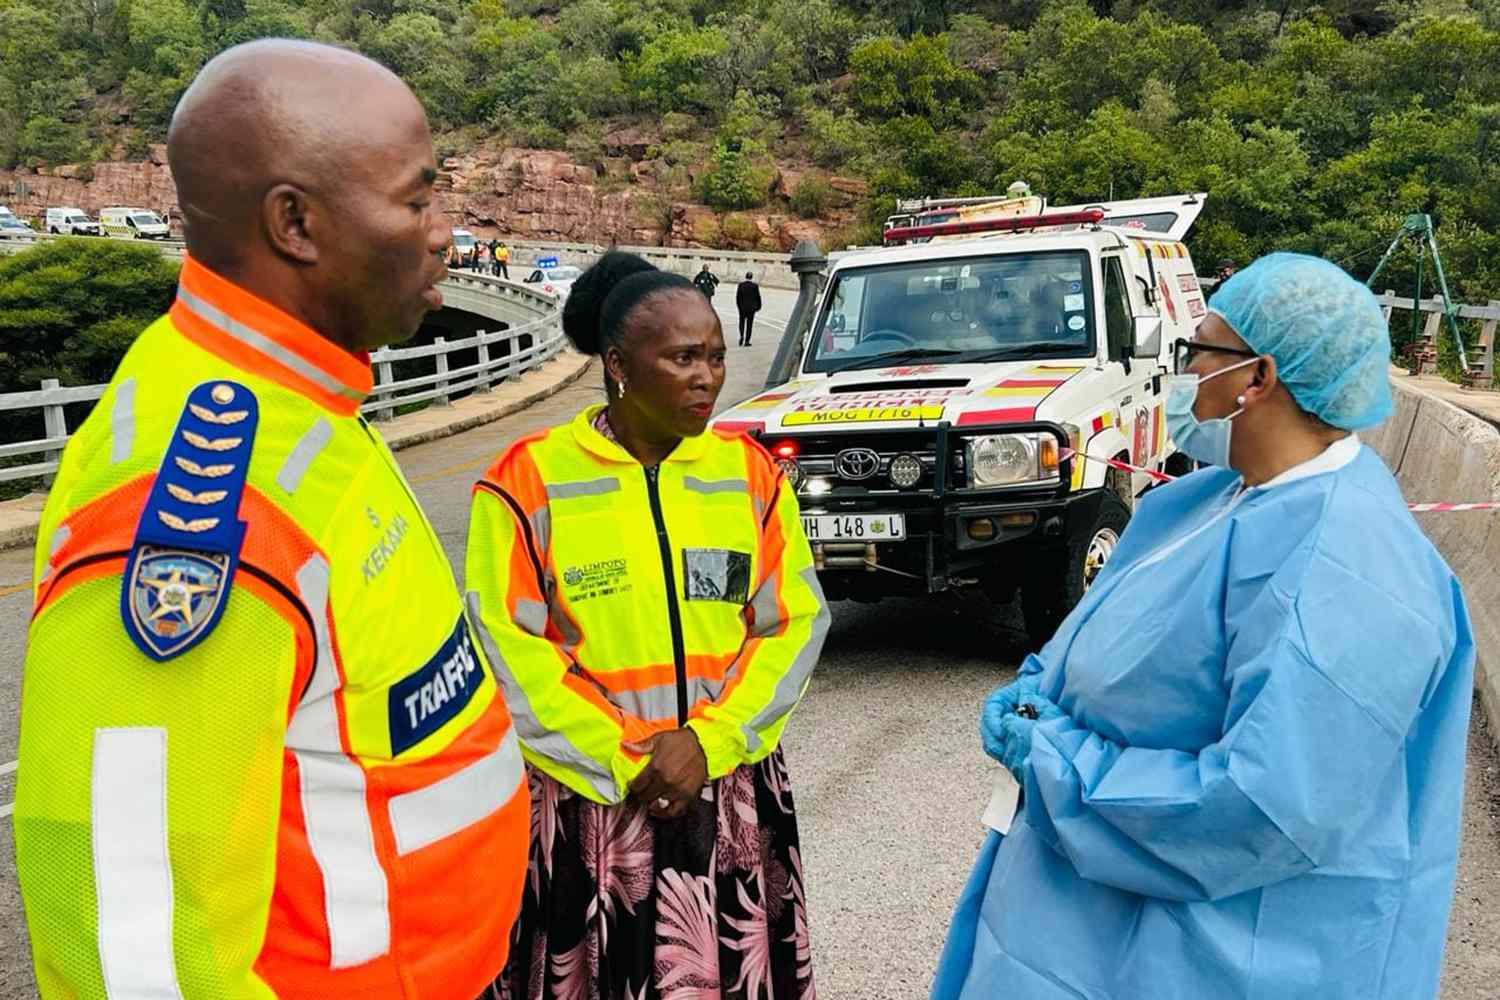 45 Dead After Bus Plunges Off Bridge in Mmamatlakala, South Africa, with 8 year old child only survivor